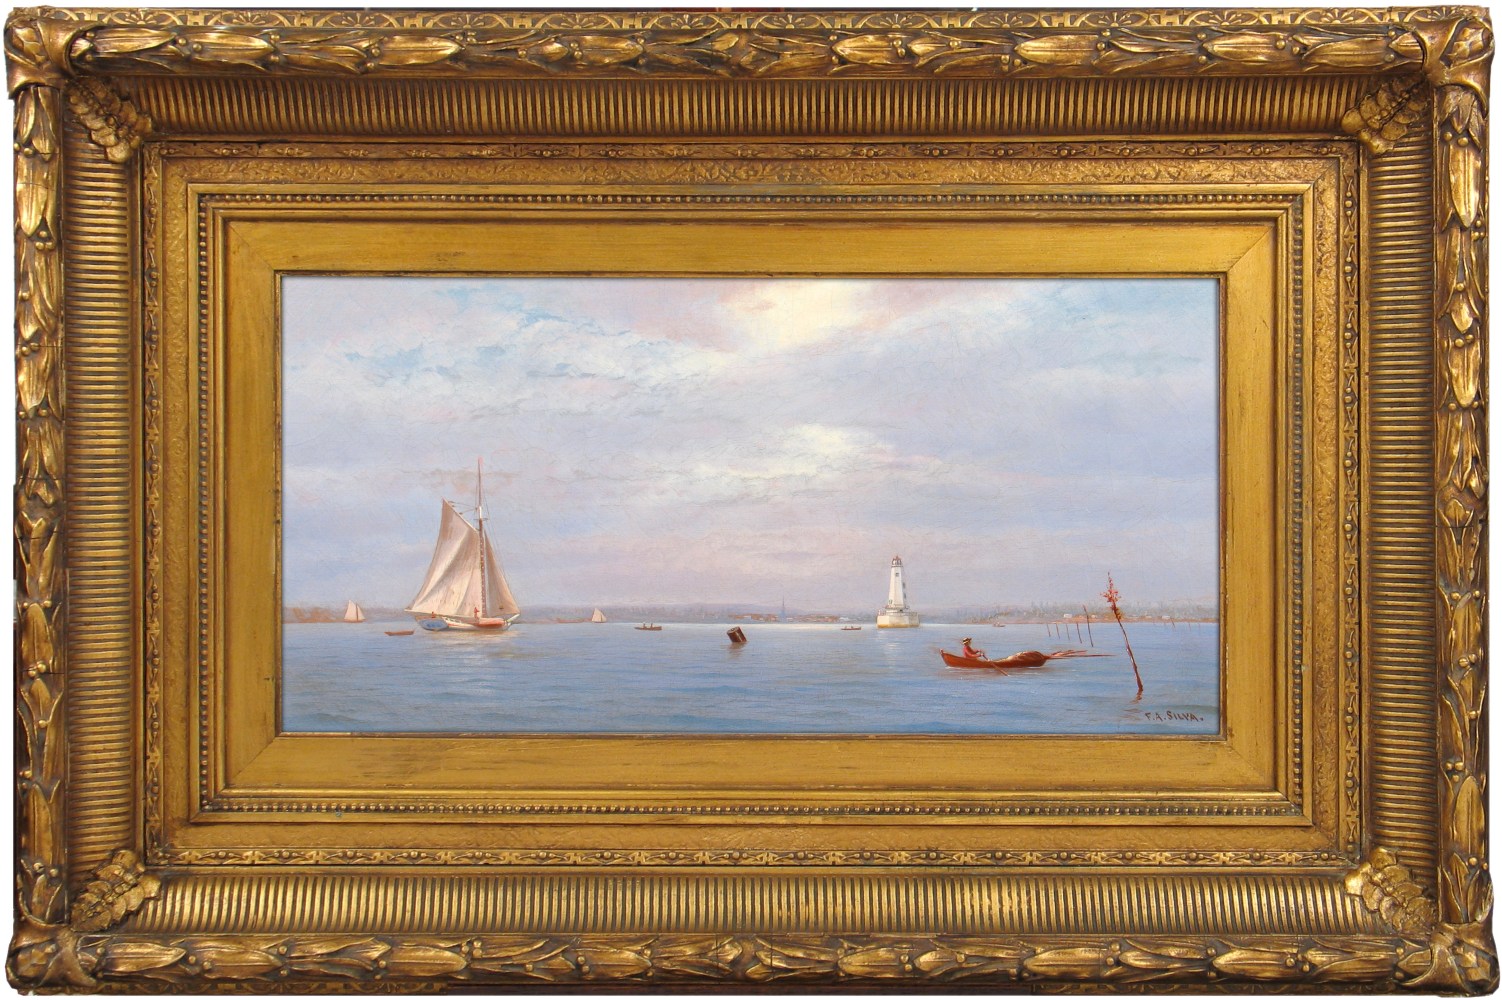 Francis Augustus Silva (1835–1886), Robbin's Reef Lighthouse off Tompkinsville, New York Harbor, c. 1880, oil on canvas, 9 x 18 in., signed lower right: F. A. Silva. (framed)